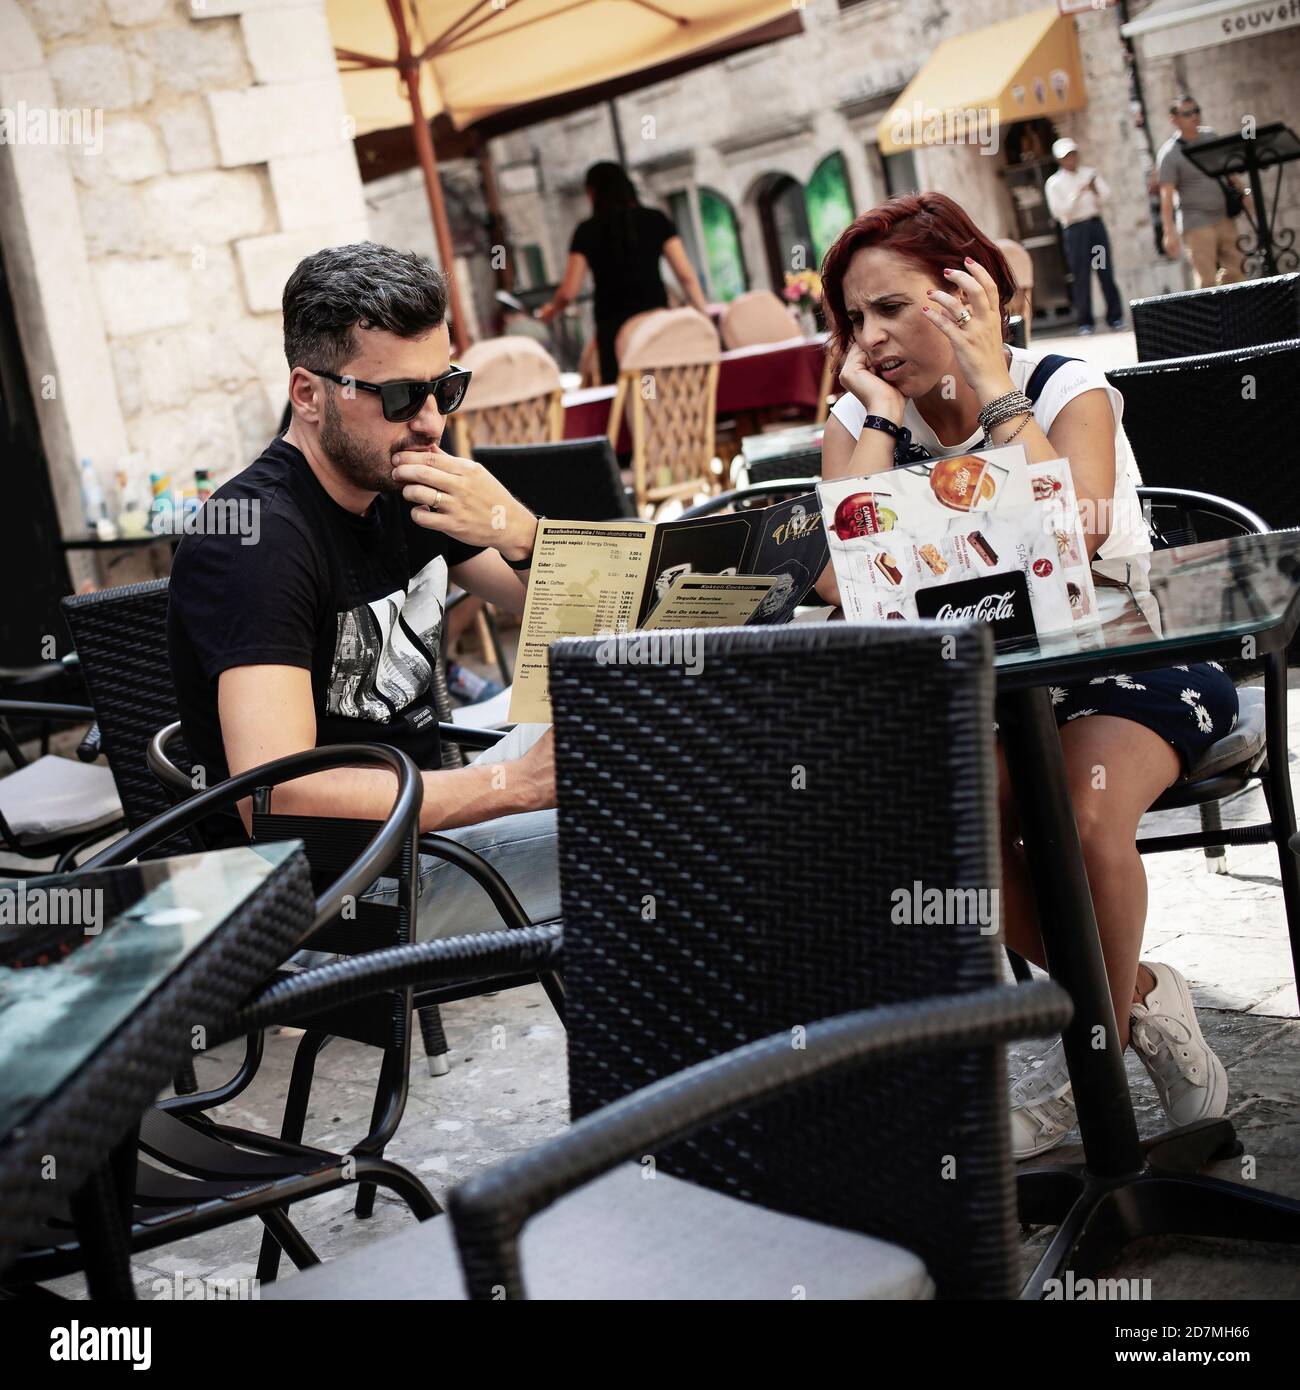 Kotor, Montenegro, Sep 18, 2019: Seated couple in a street café Stock Photo